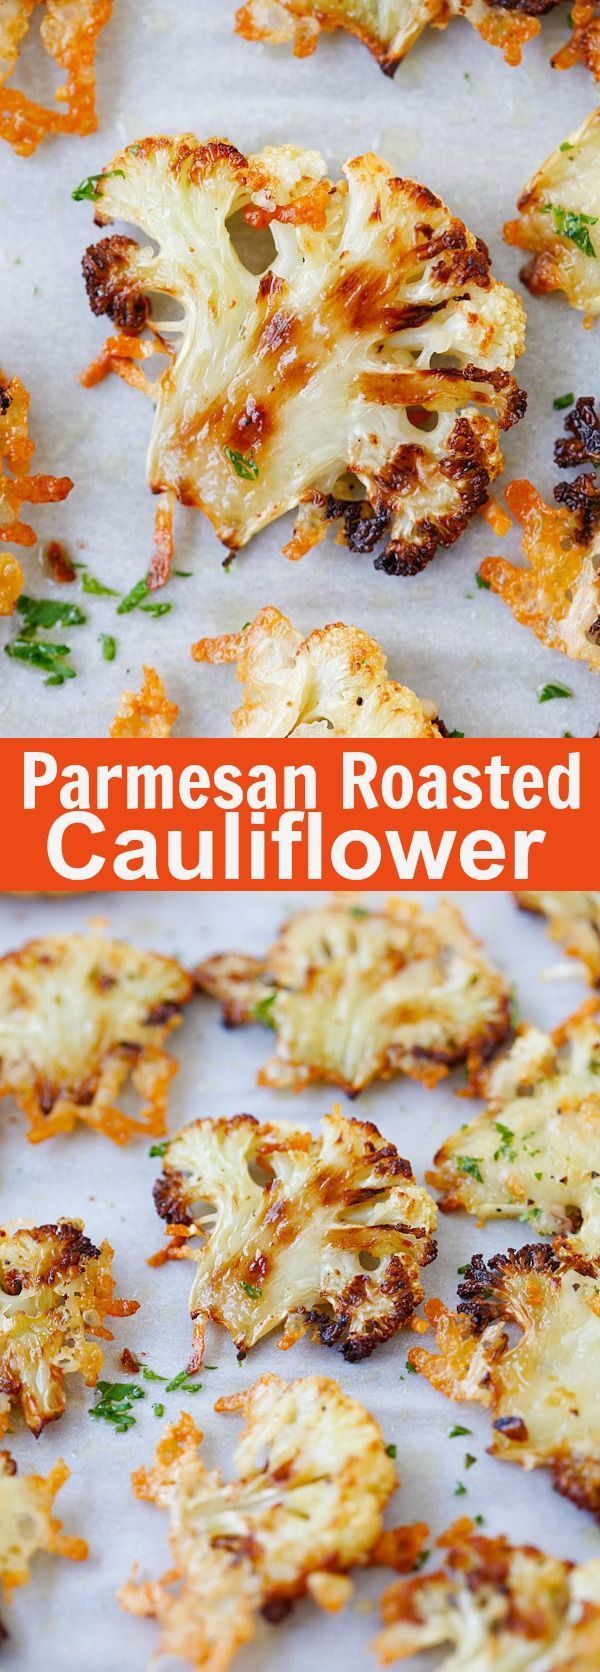 Parmesan Roasted Cauliflower – best cauliflower ever, baked in oven with butter, olive oil and Parmesan cheese. A perfect side